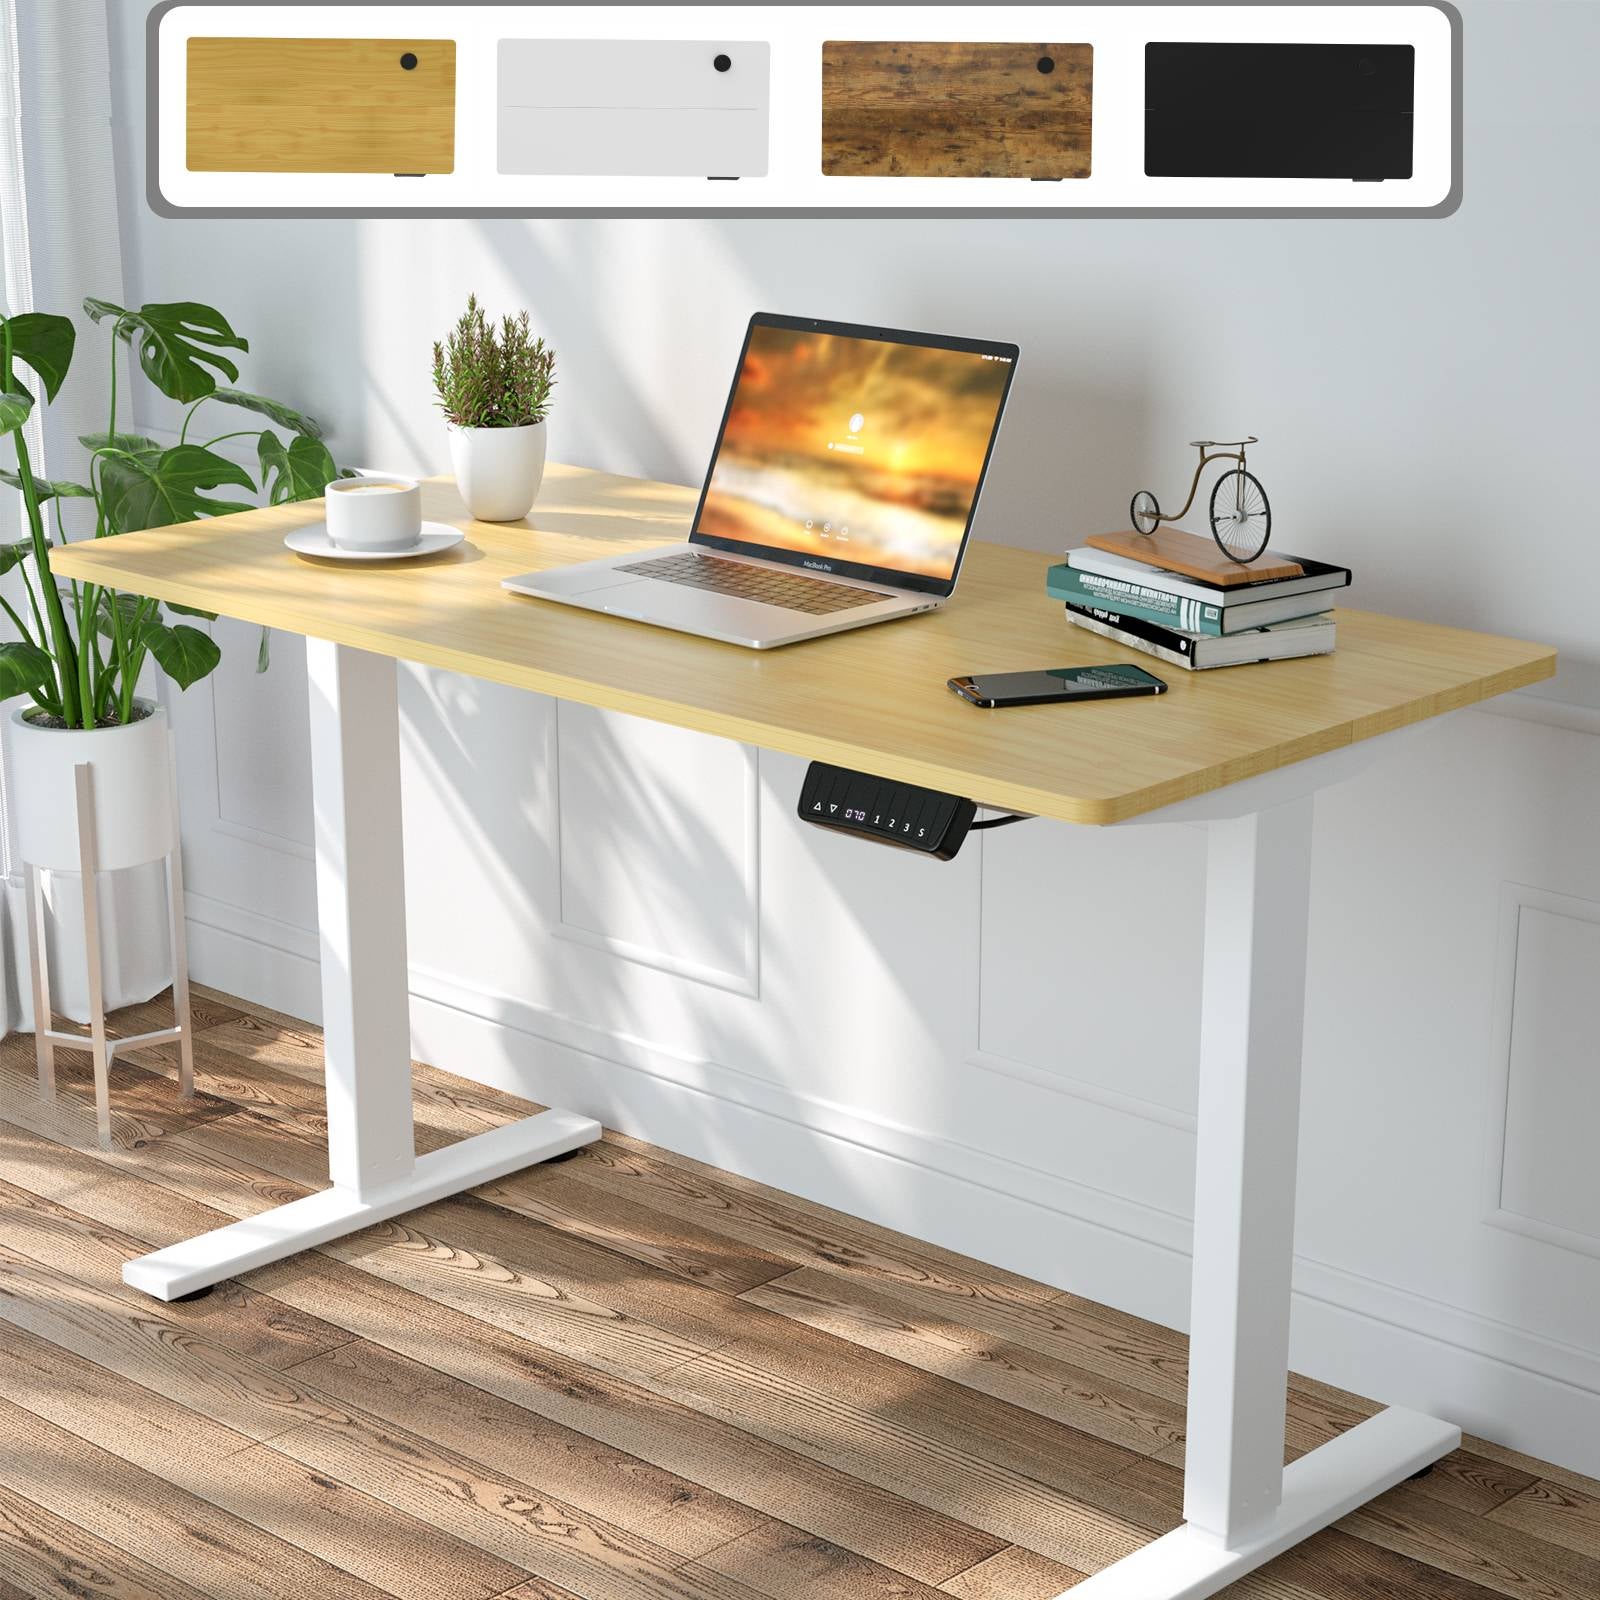 Adjustable Height Electric Standing Desk, Ergonomic Stand Up Desk Sit Stand Desk with 120 x 60cm Splice Board(White/Black/Wood)